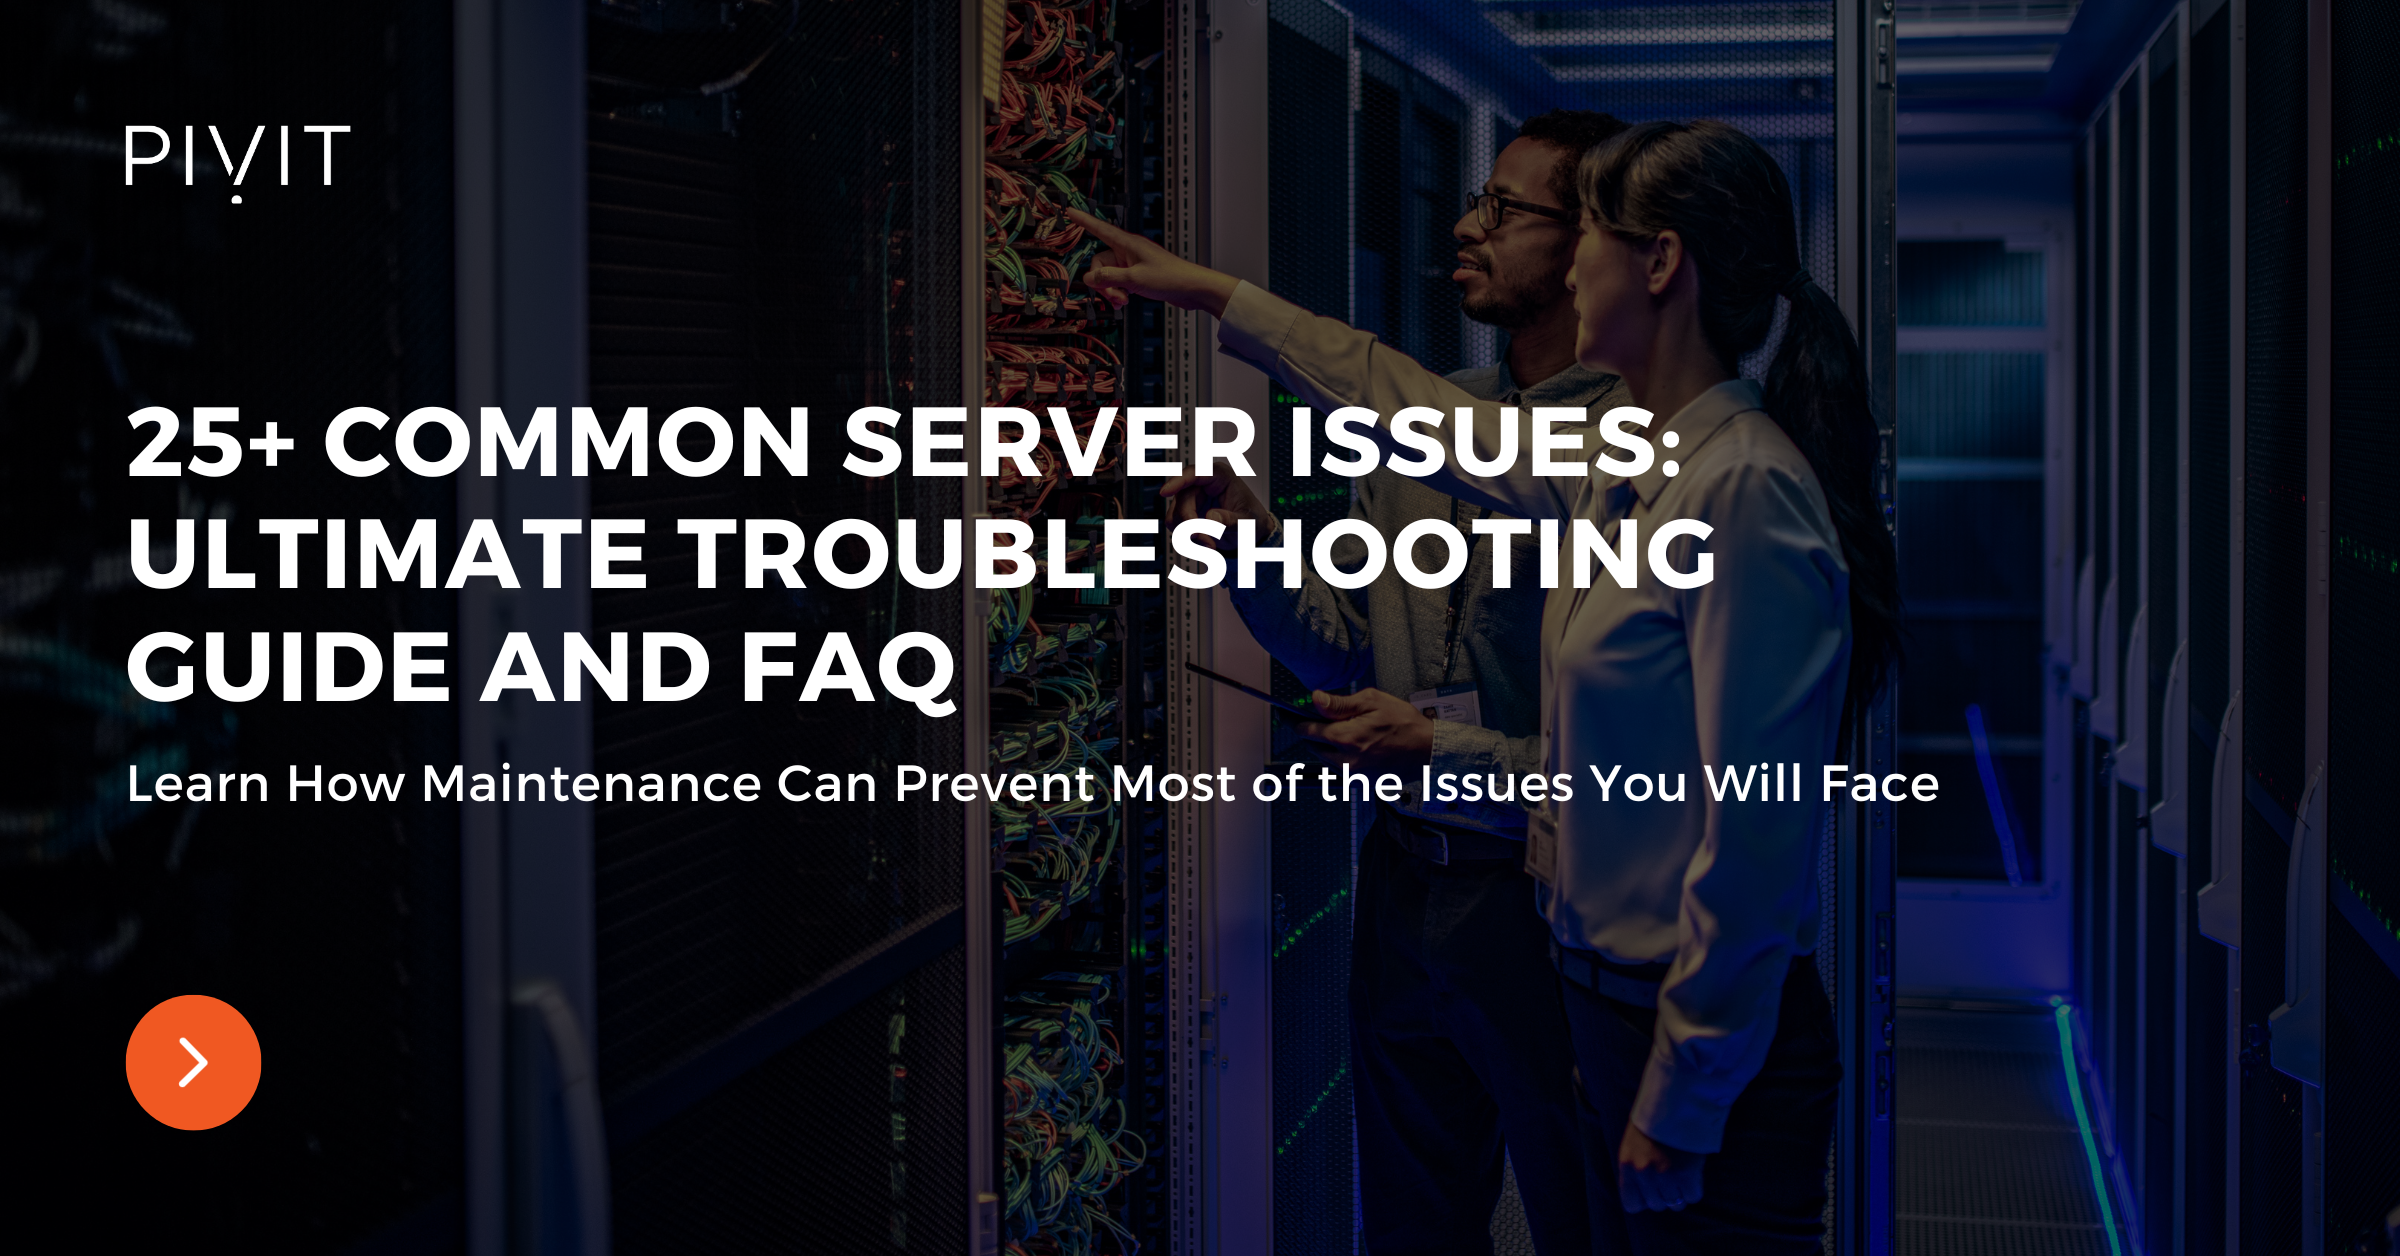 25+ Common Server Issues: Ultimate Troubleshooting Guide and FAQ - Learn How Maintenance Can Prevent Most of the Issues You Will Face